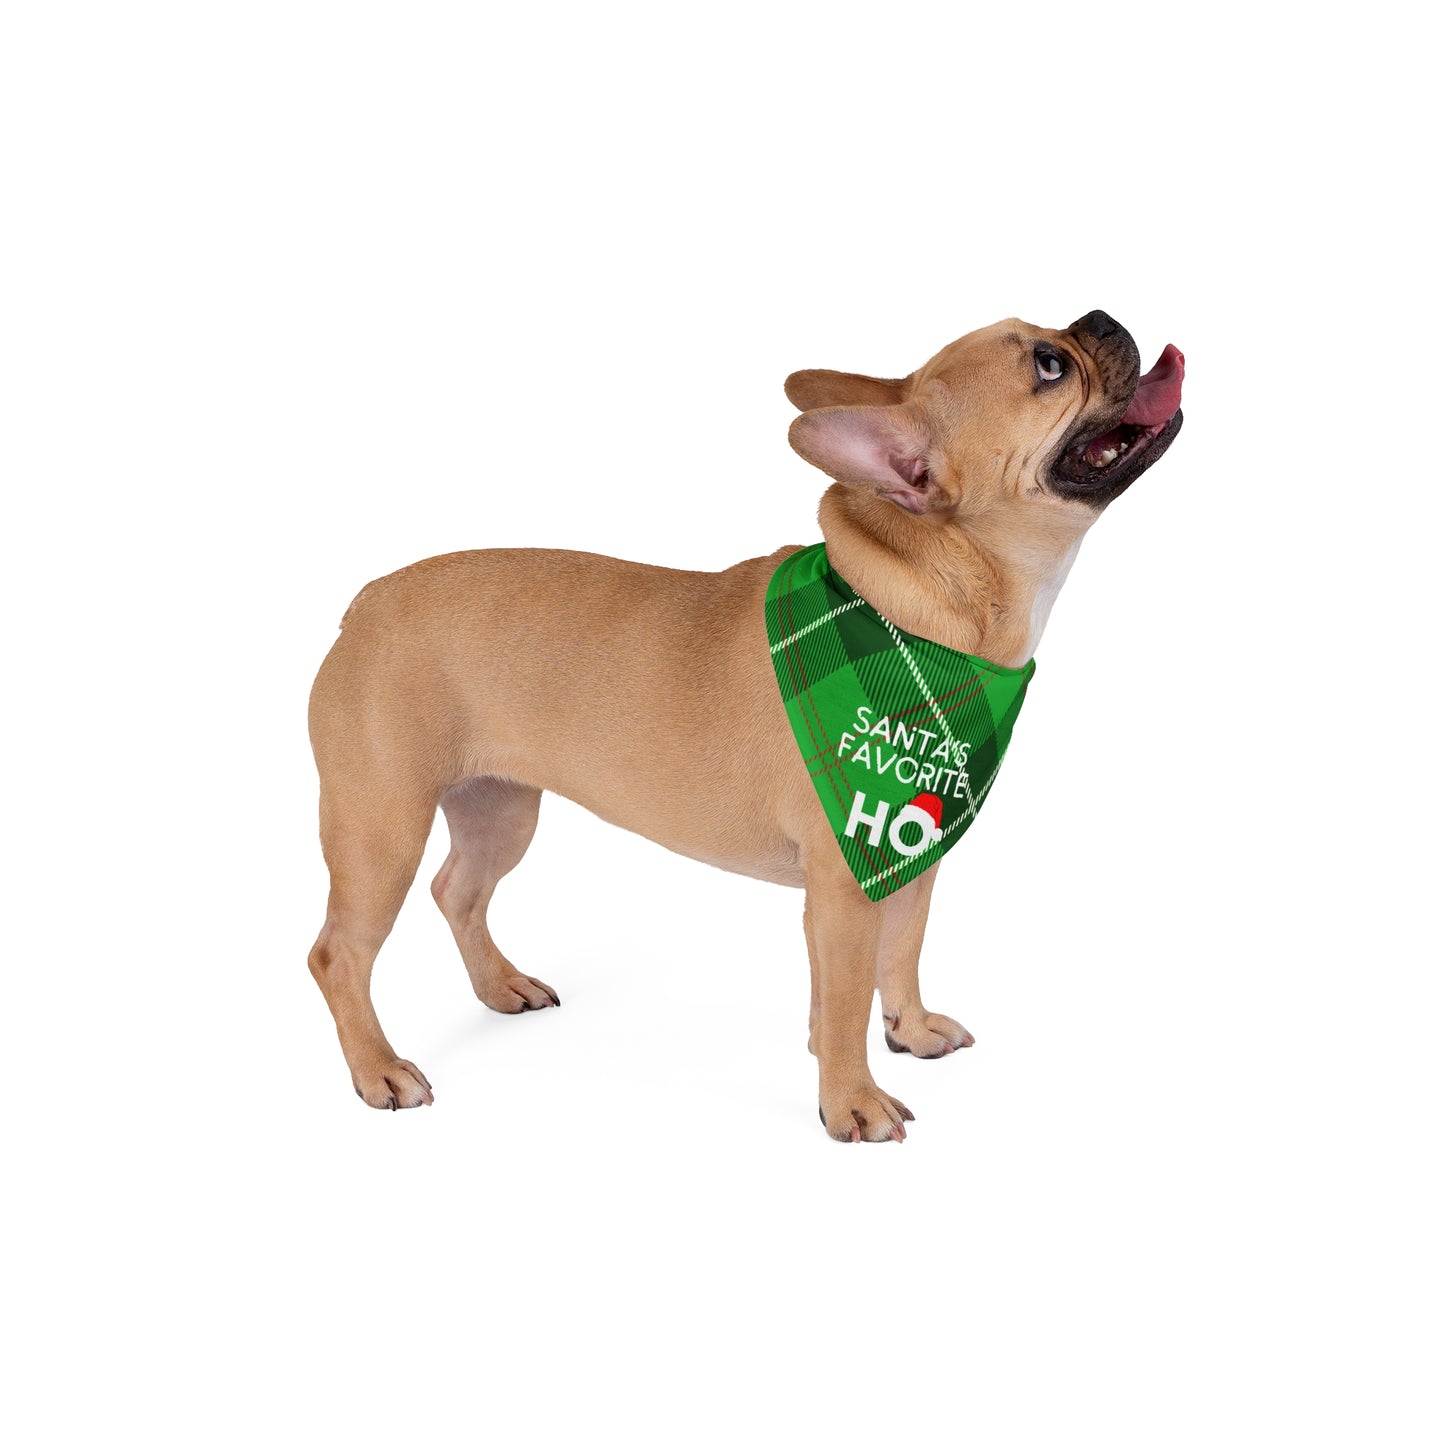 Santa's Favorite Ho Pet Bandana- 2 Sizes for Dogs and Cats